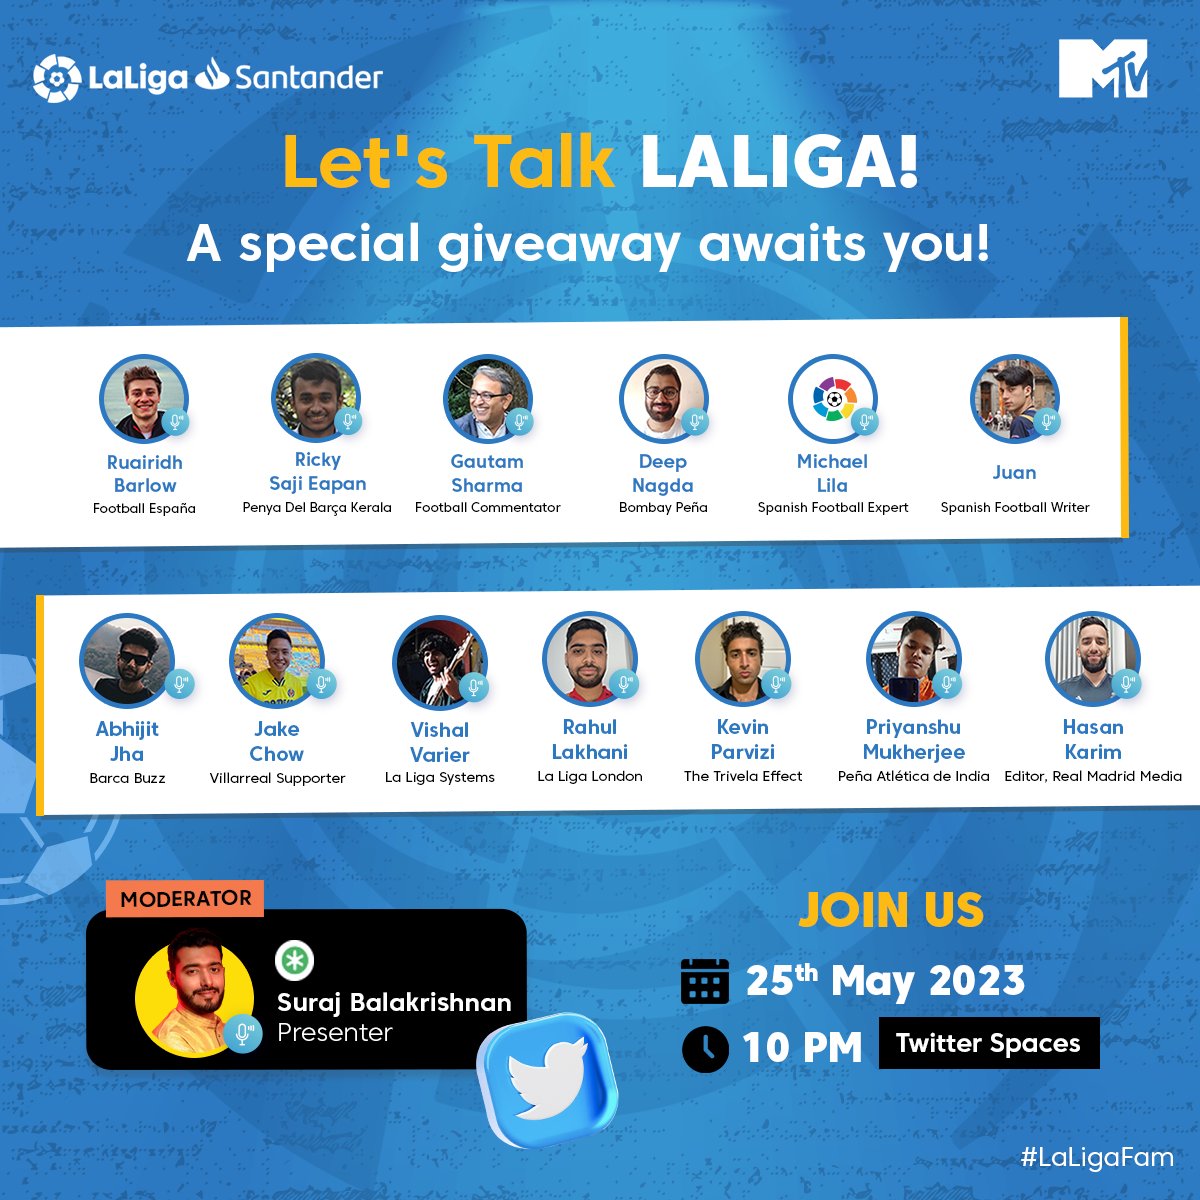 Attention #LaLigaFam, we are back with the much awaited conversation on LaLiga, but this time with a surprise!

One lucky winner will get the official LaLiga football! So, don't forget to tune in tomorrow at 10 PM!

#LaLigaSantander #LaLigaOnMTV #KickoffLaLigaSantander…